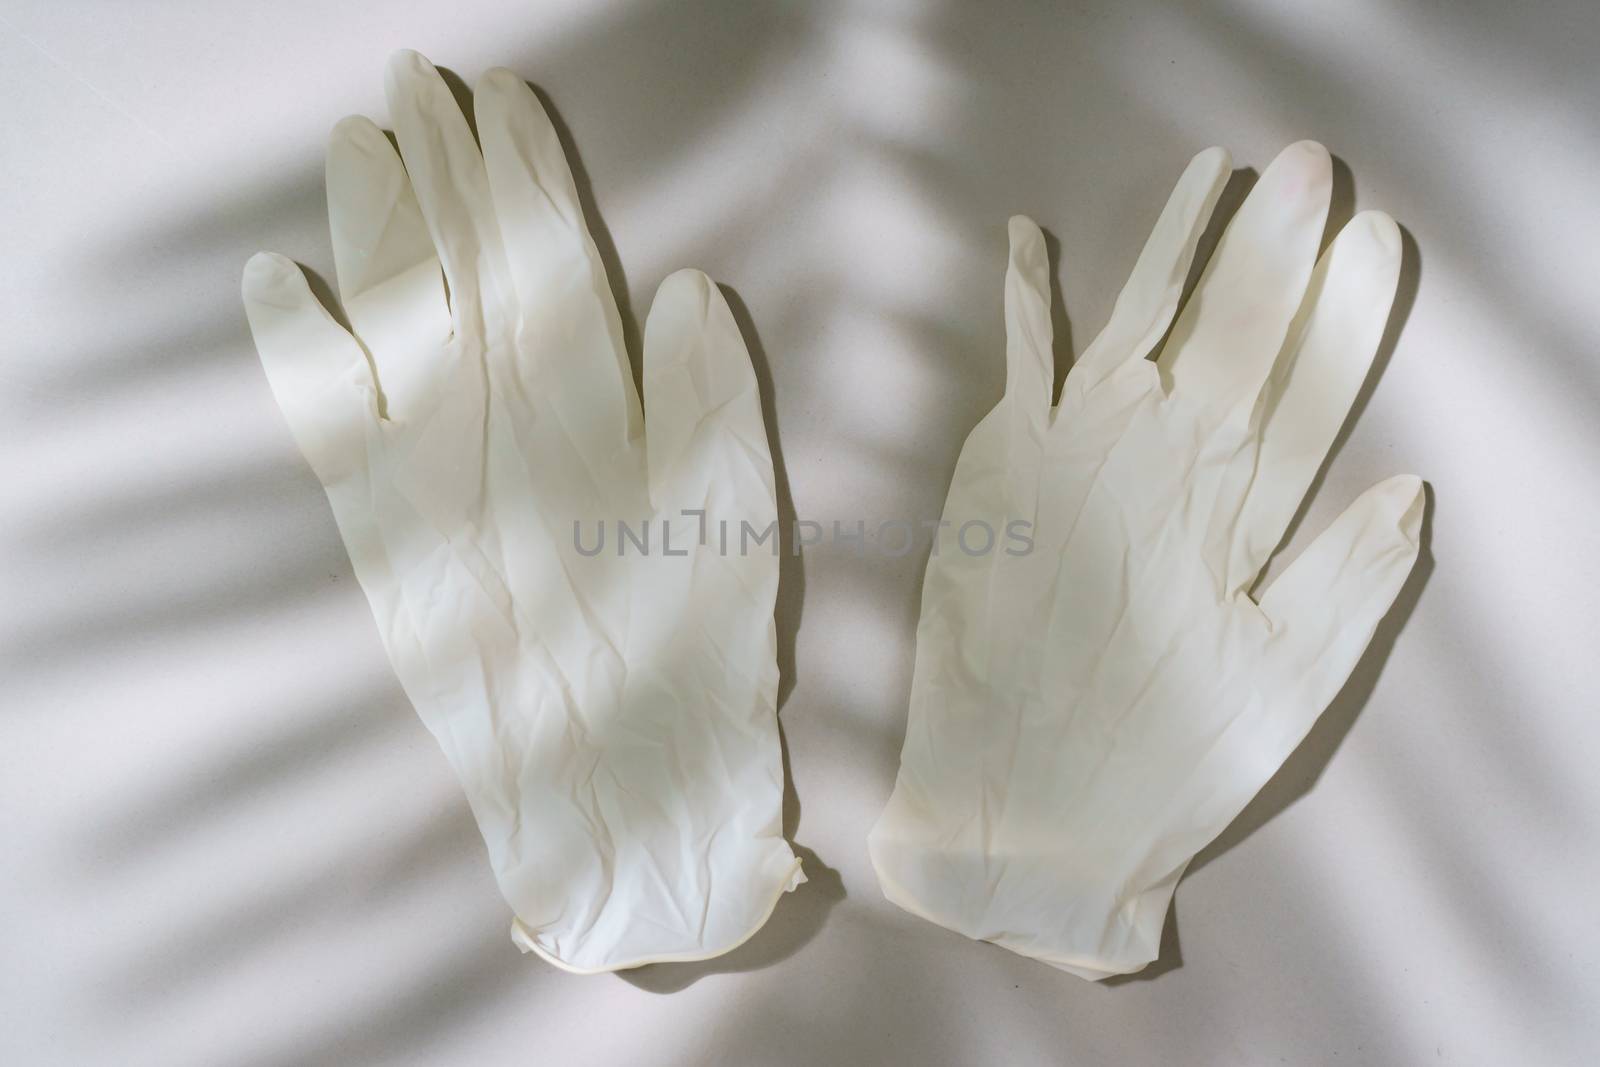 Pair of white latex medical gloves by sirawit99